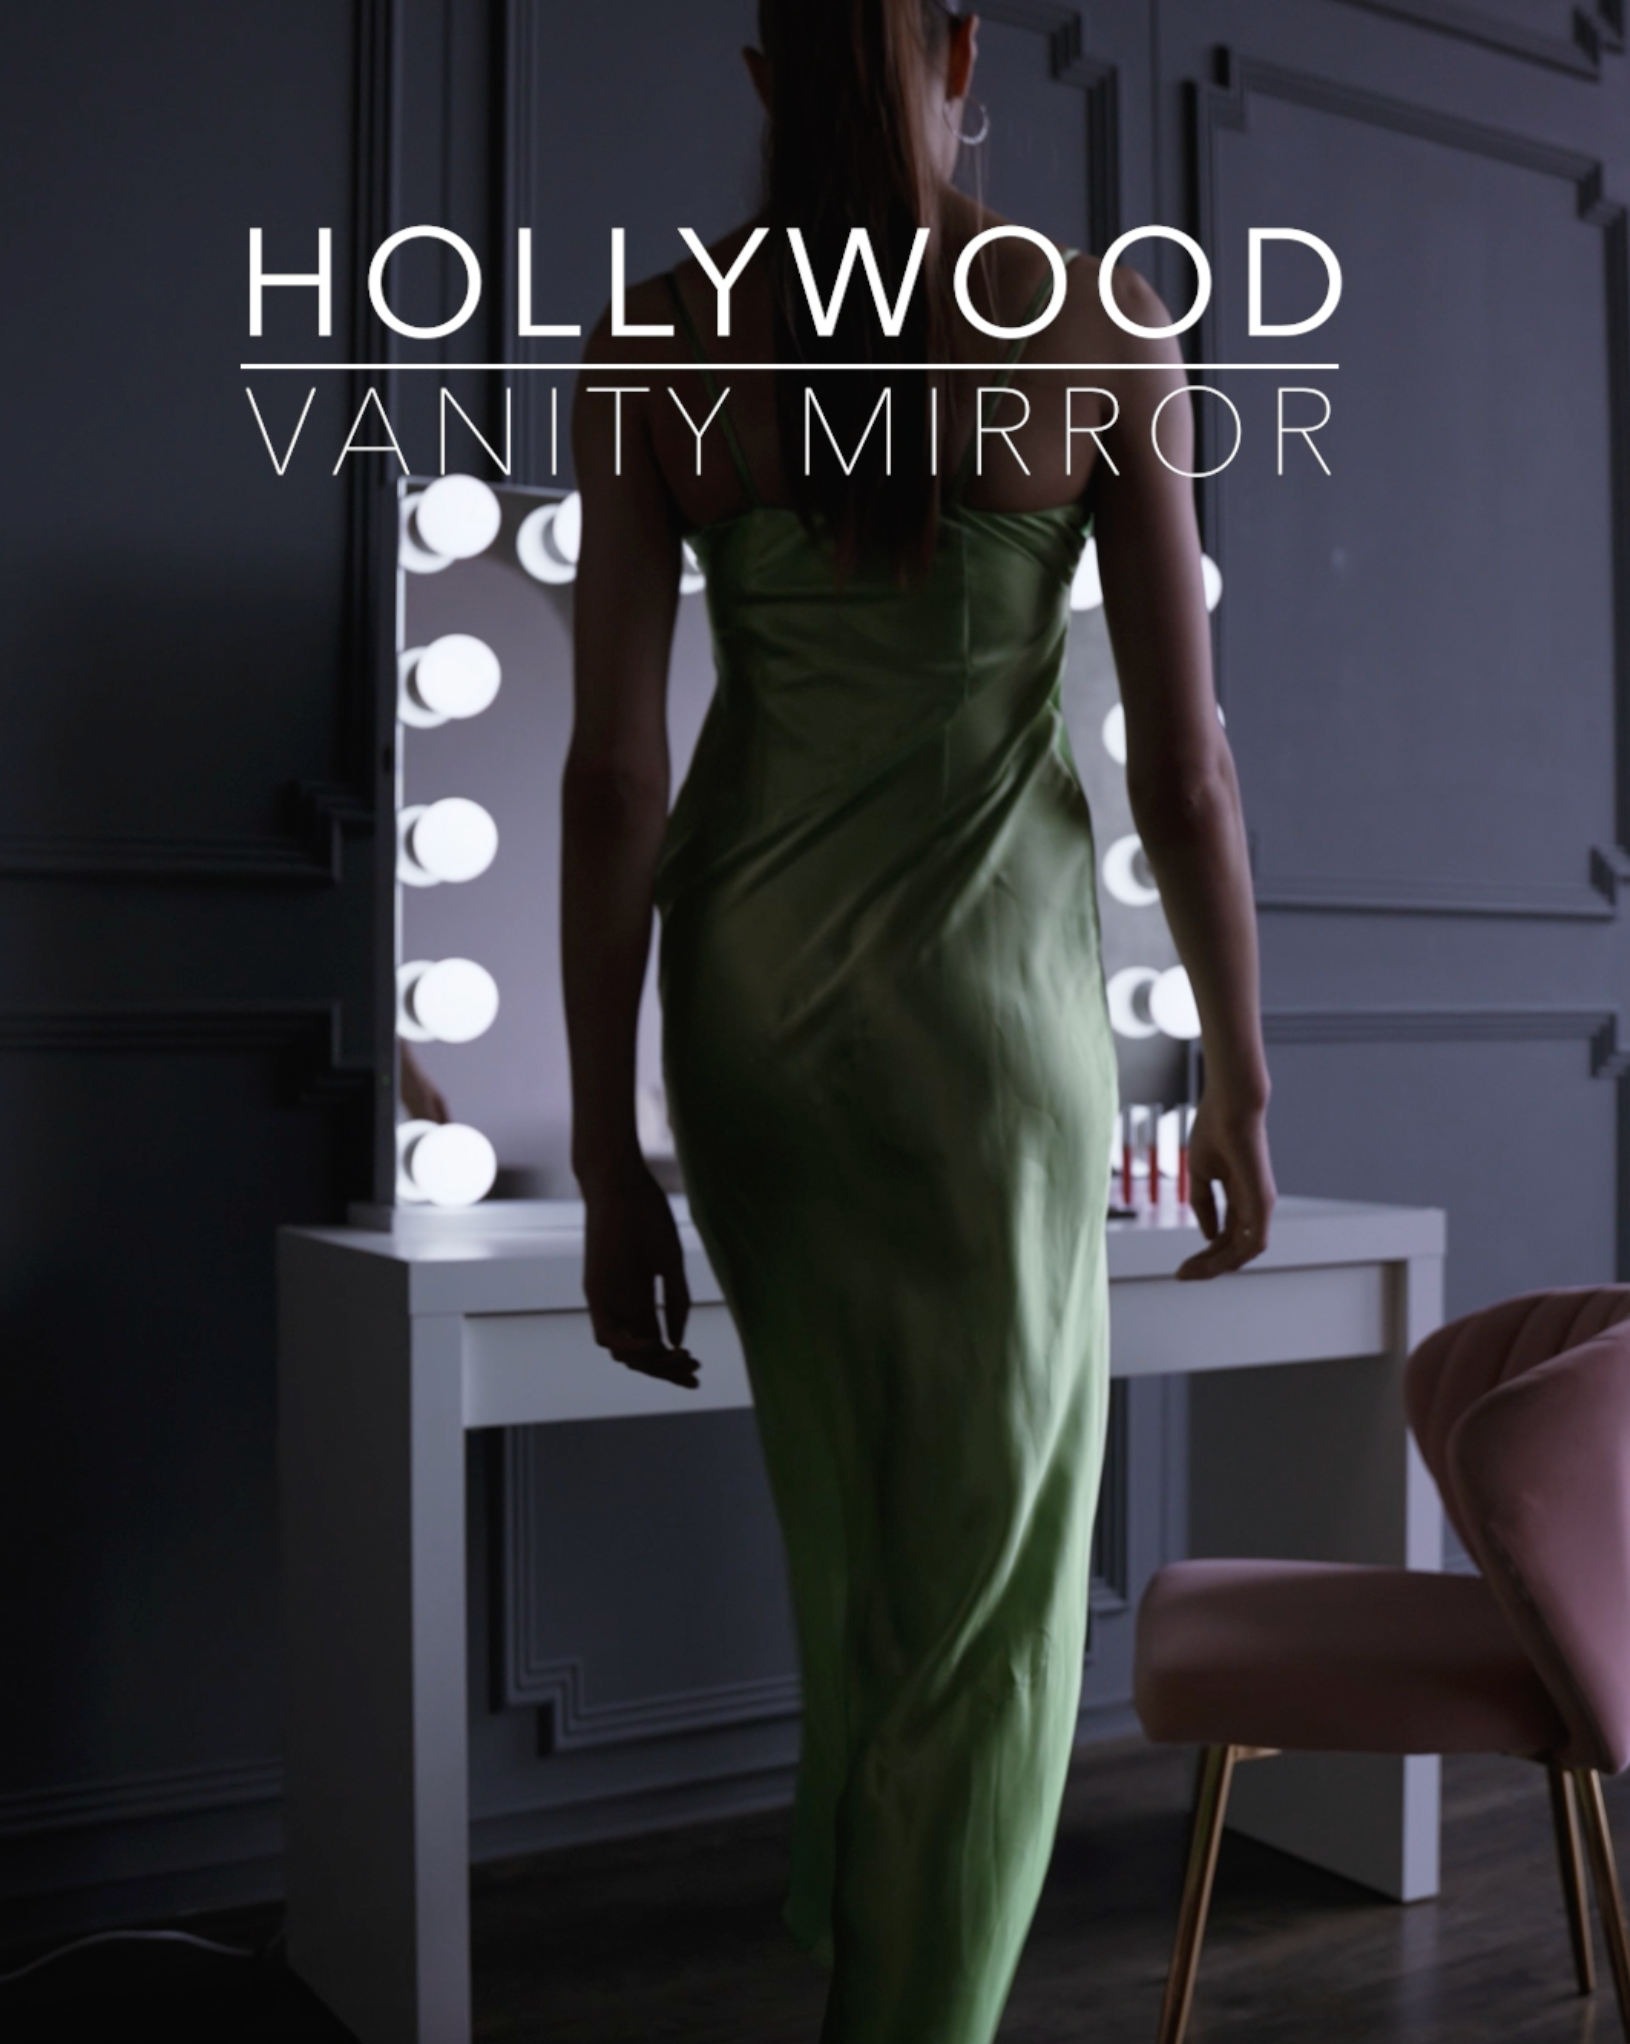 Load video: Video showcasing a Hollywood-style vanity mirror with illuminated bulbs framing the edges, reflecting a glamorous makeup setup.